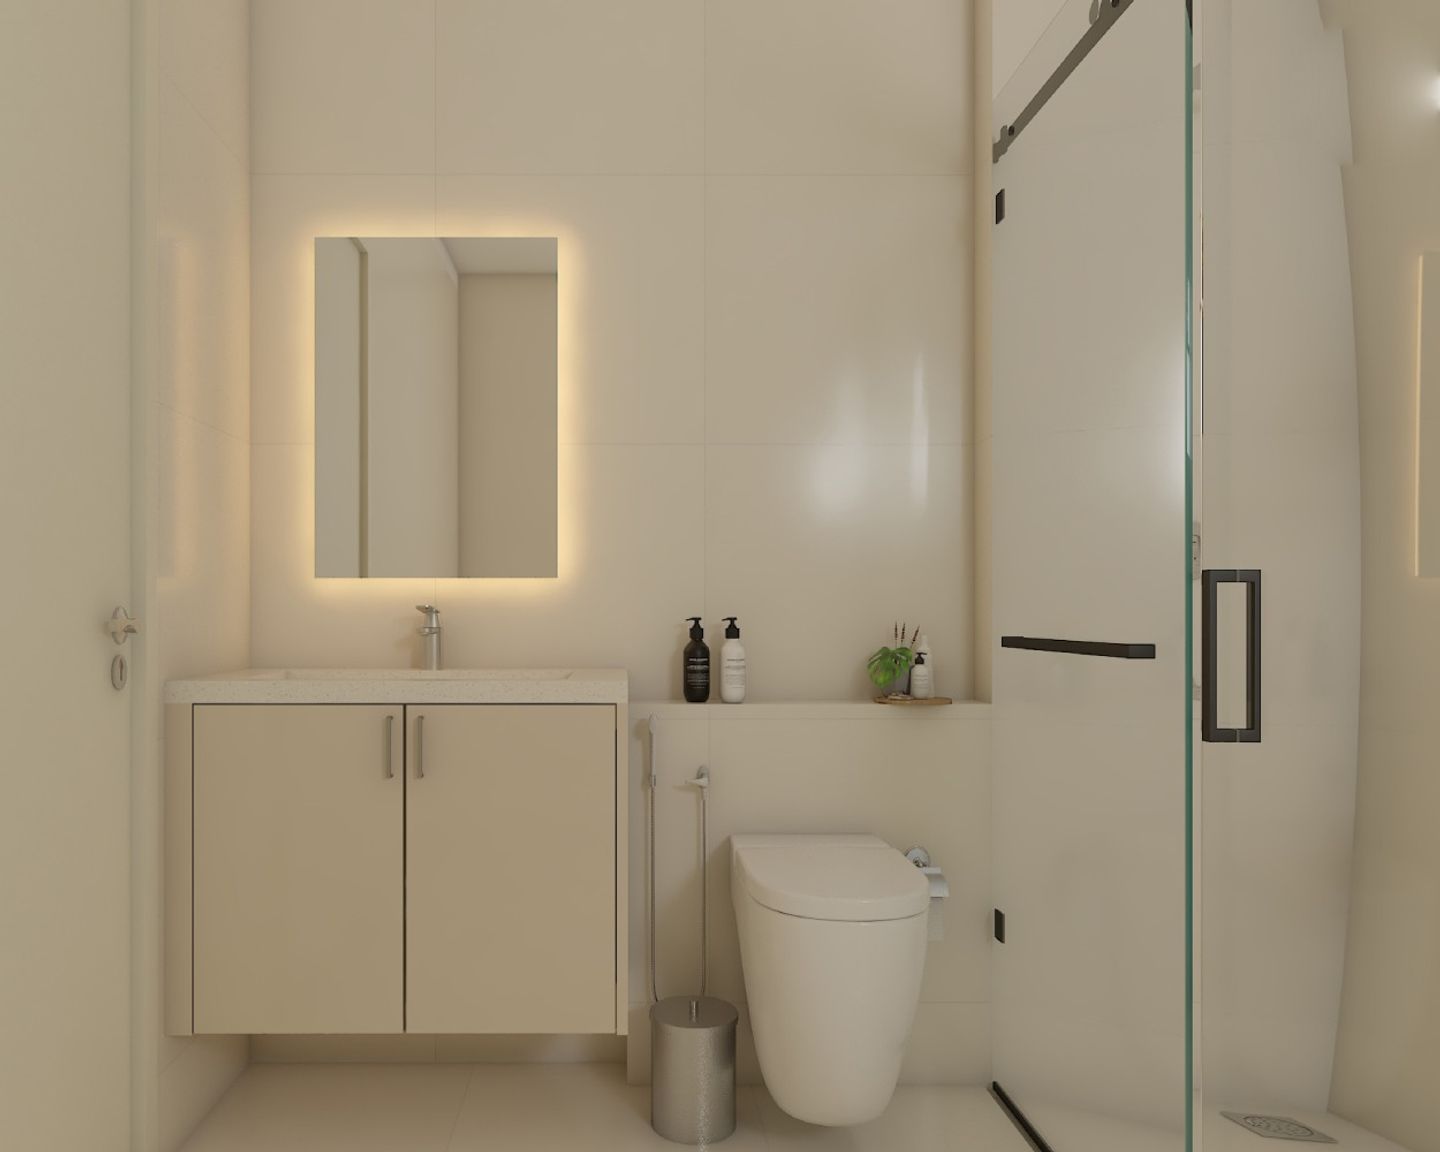 Compact Bathroom Design With Cream Tiles And Wall-Mounted Storage - Livspace